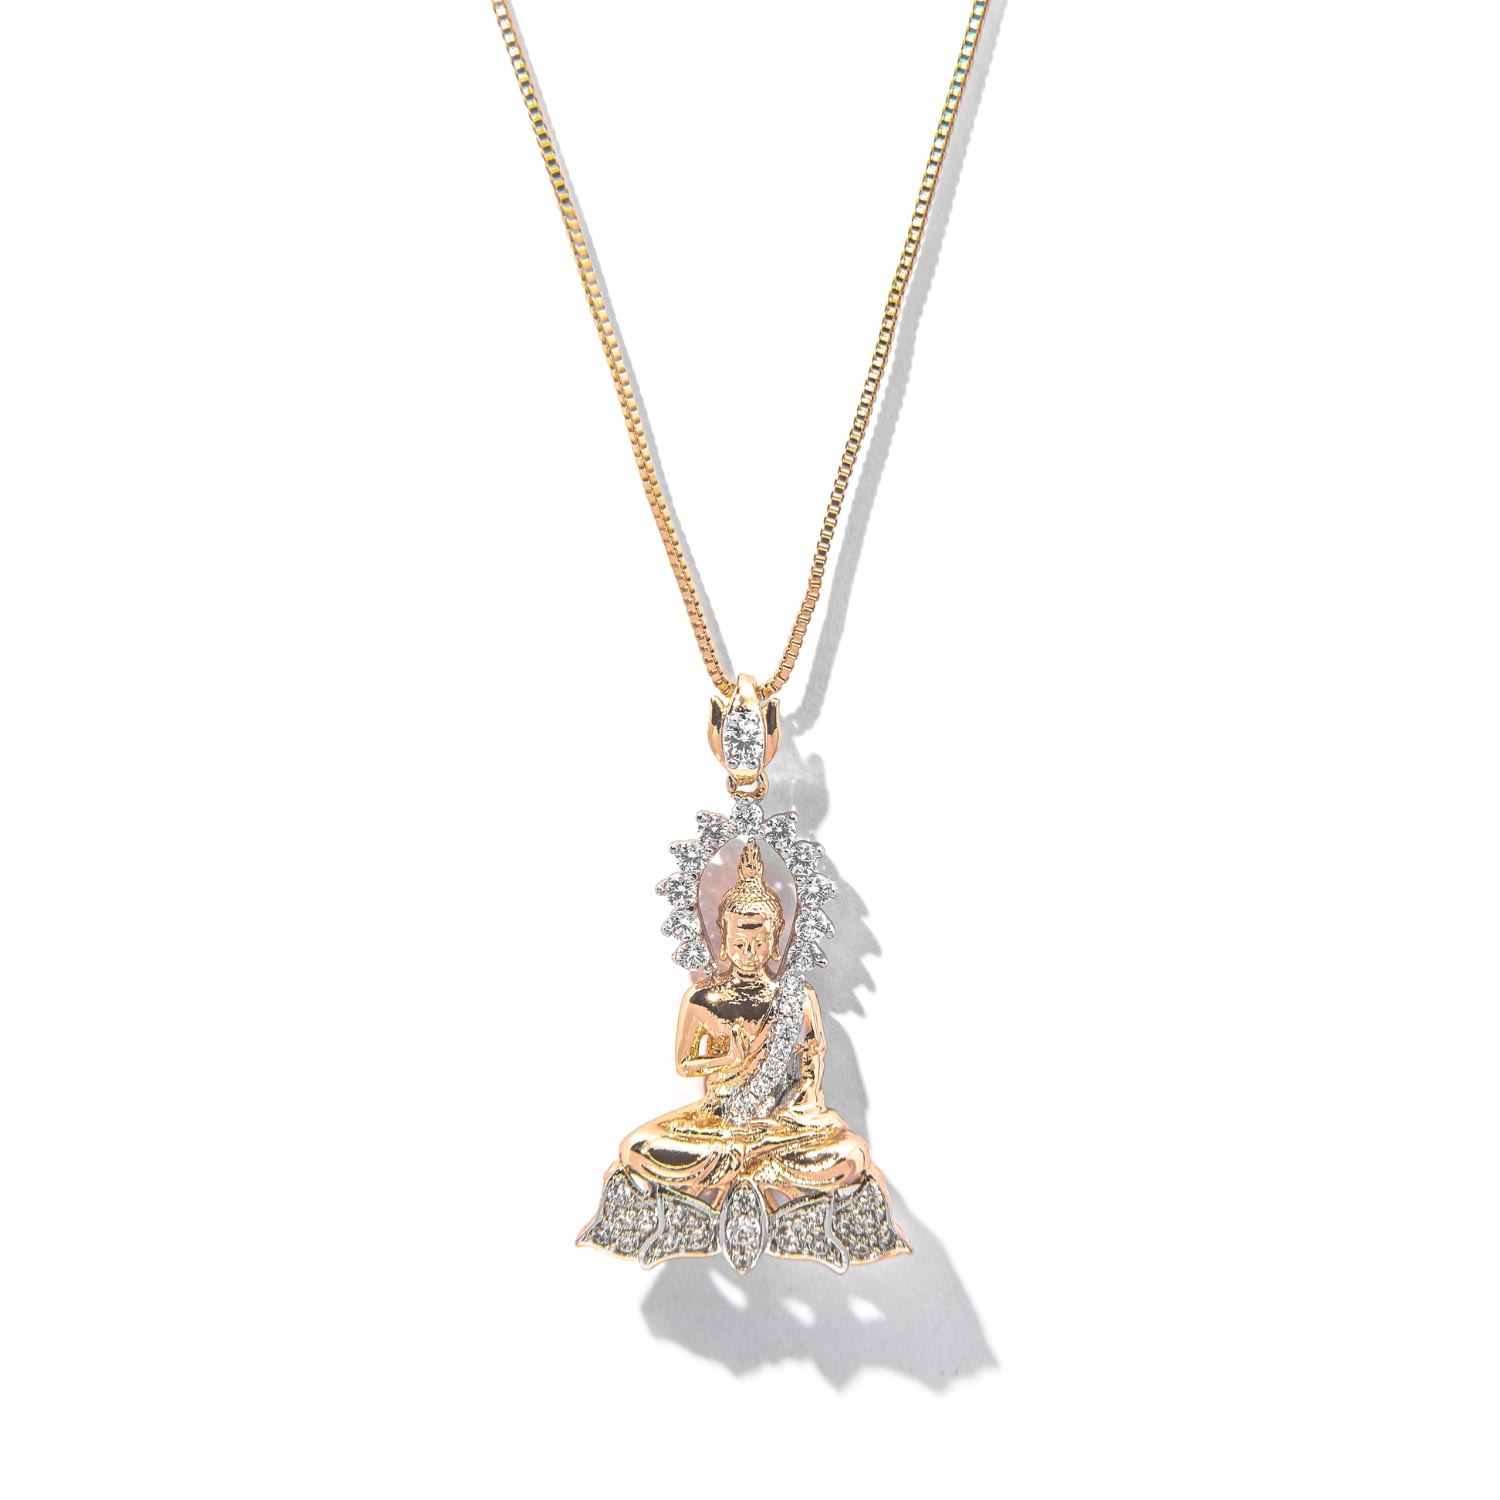 Women's Gold / Silver Gold Zen Buddha Pendant Necklace The Essential Jewels